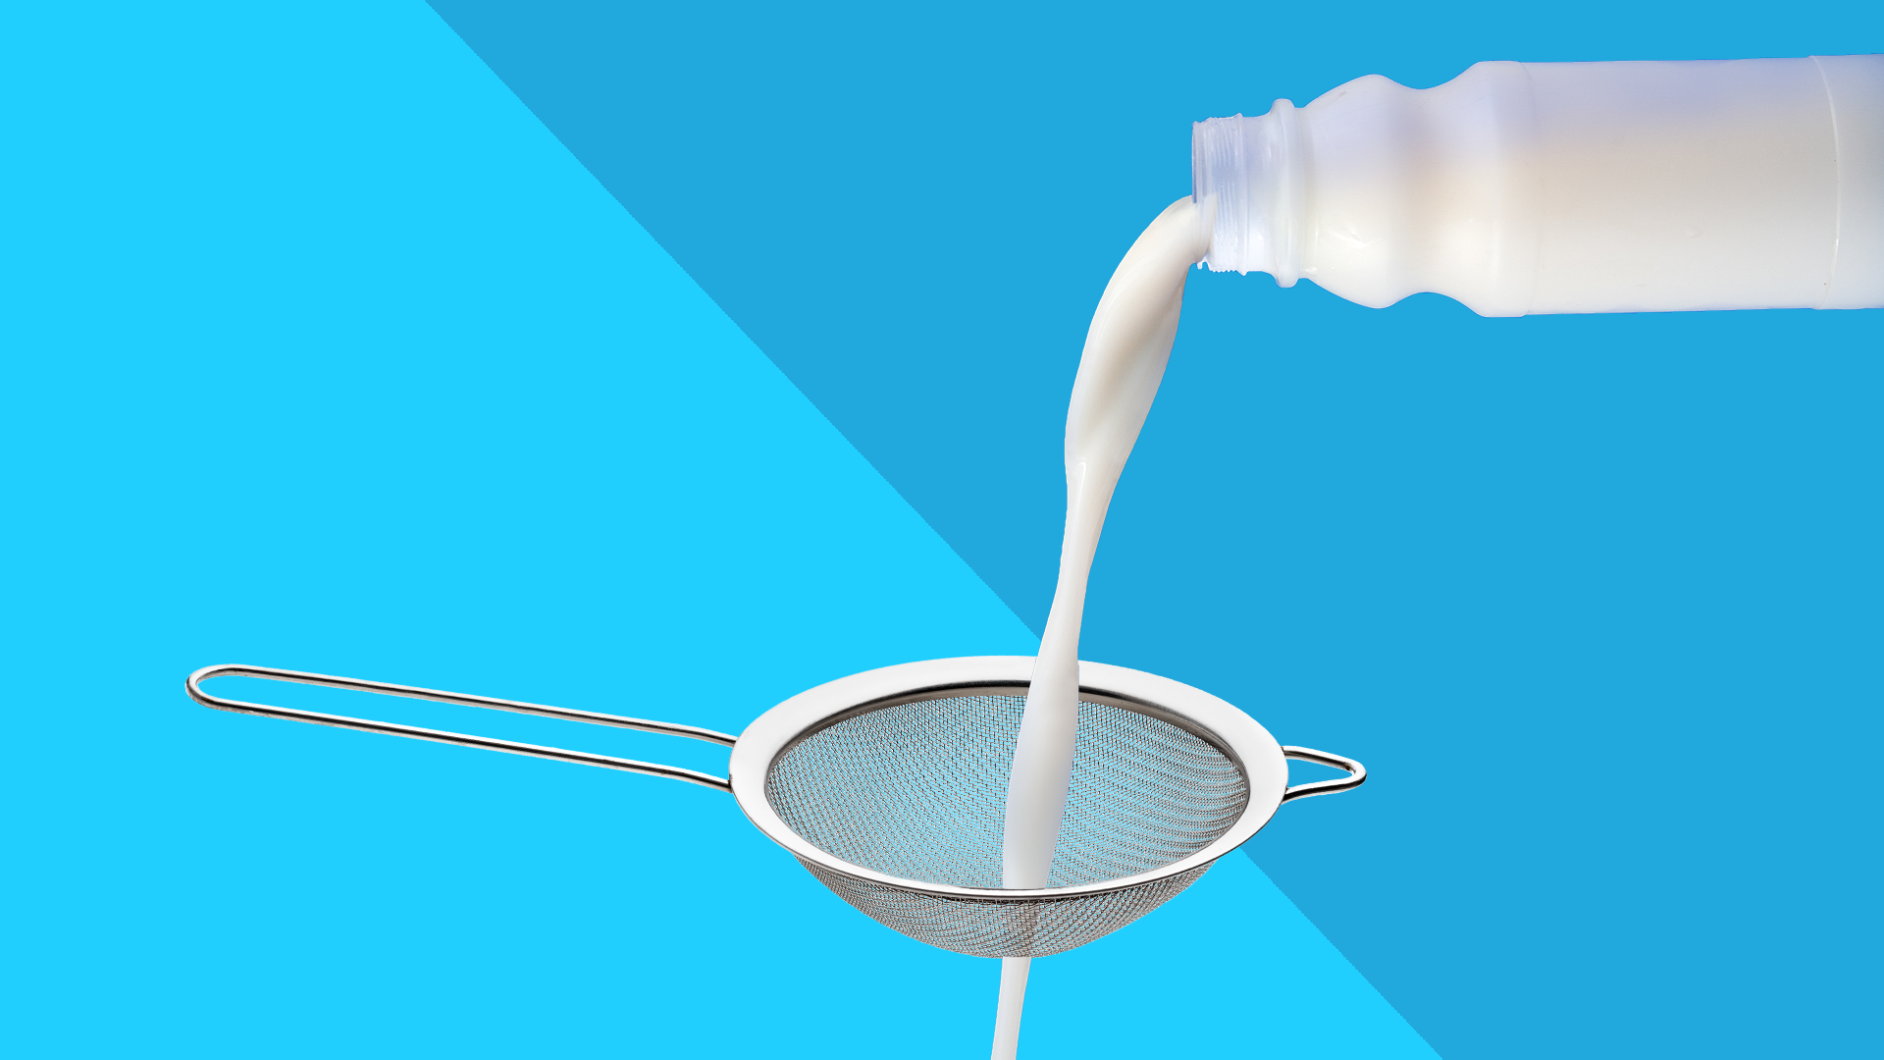 Milk pouring through a sieve represents medications when breastfeeding